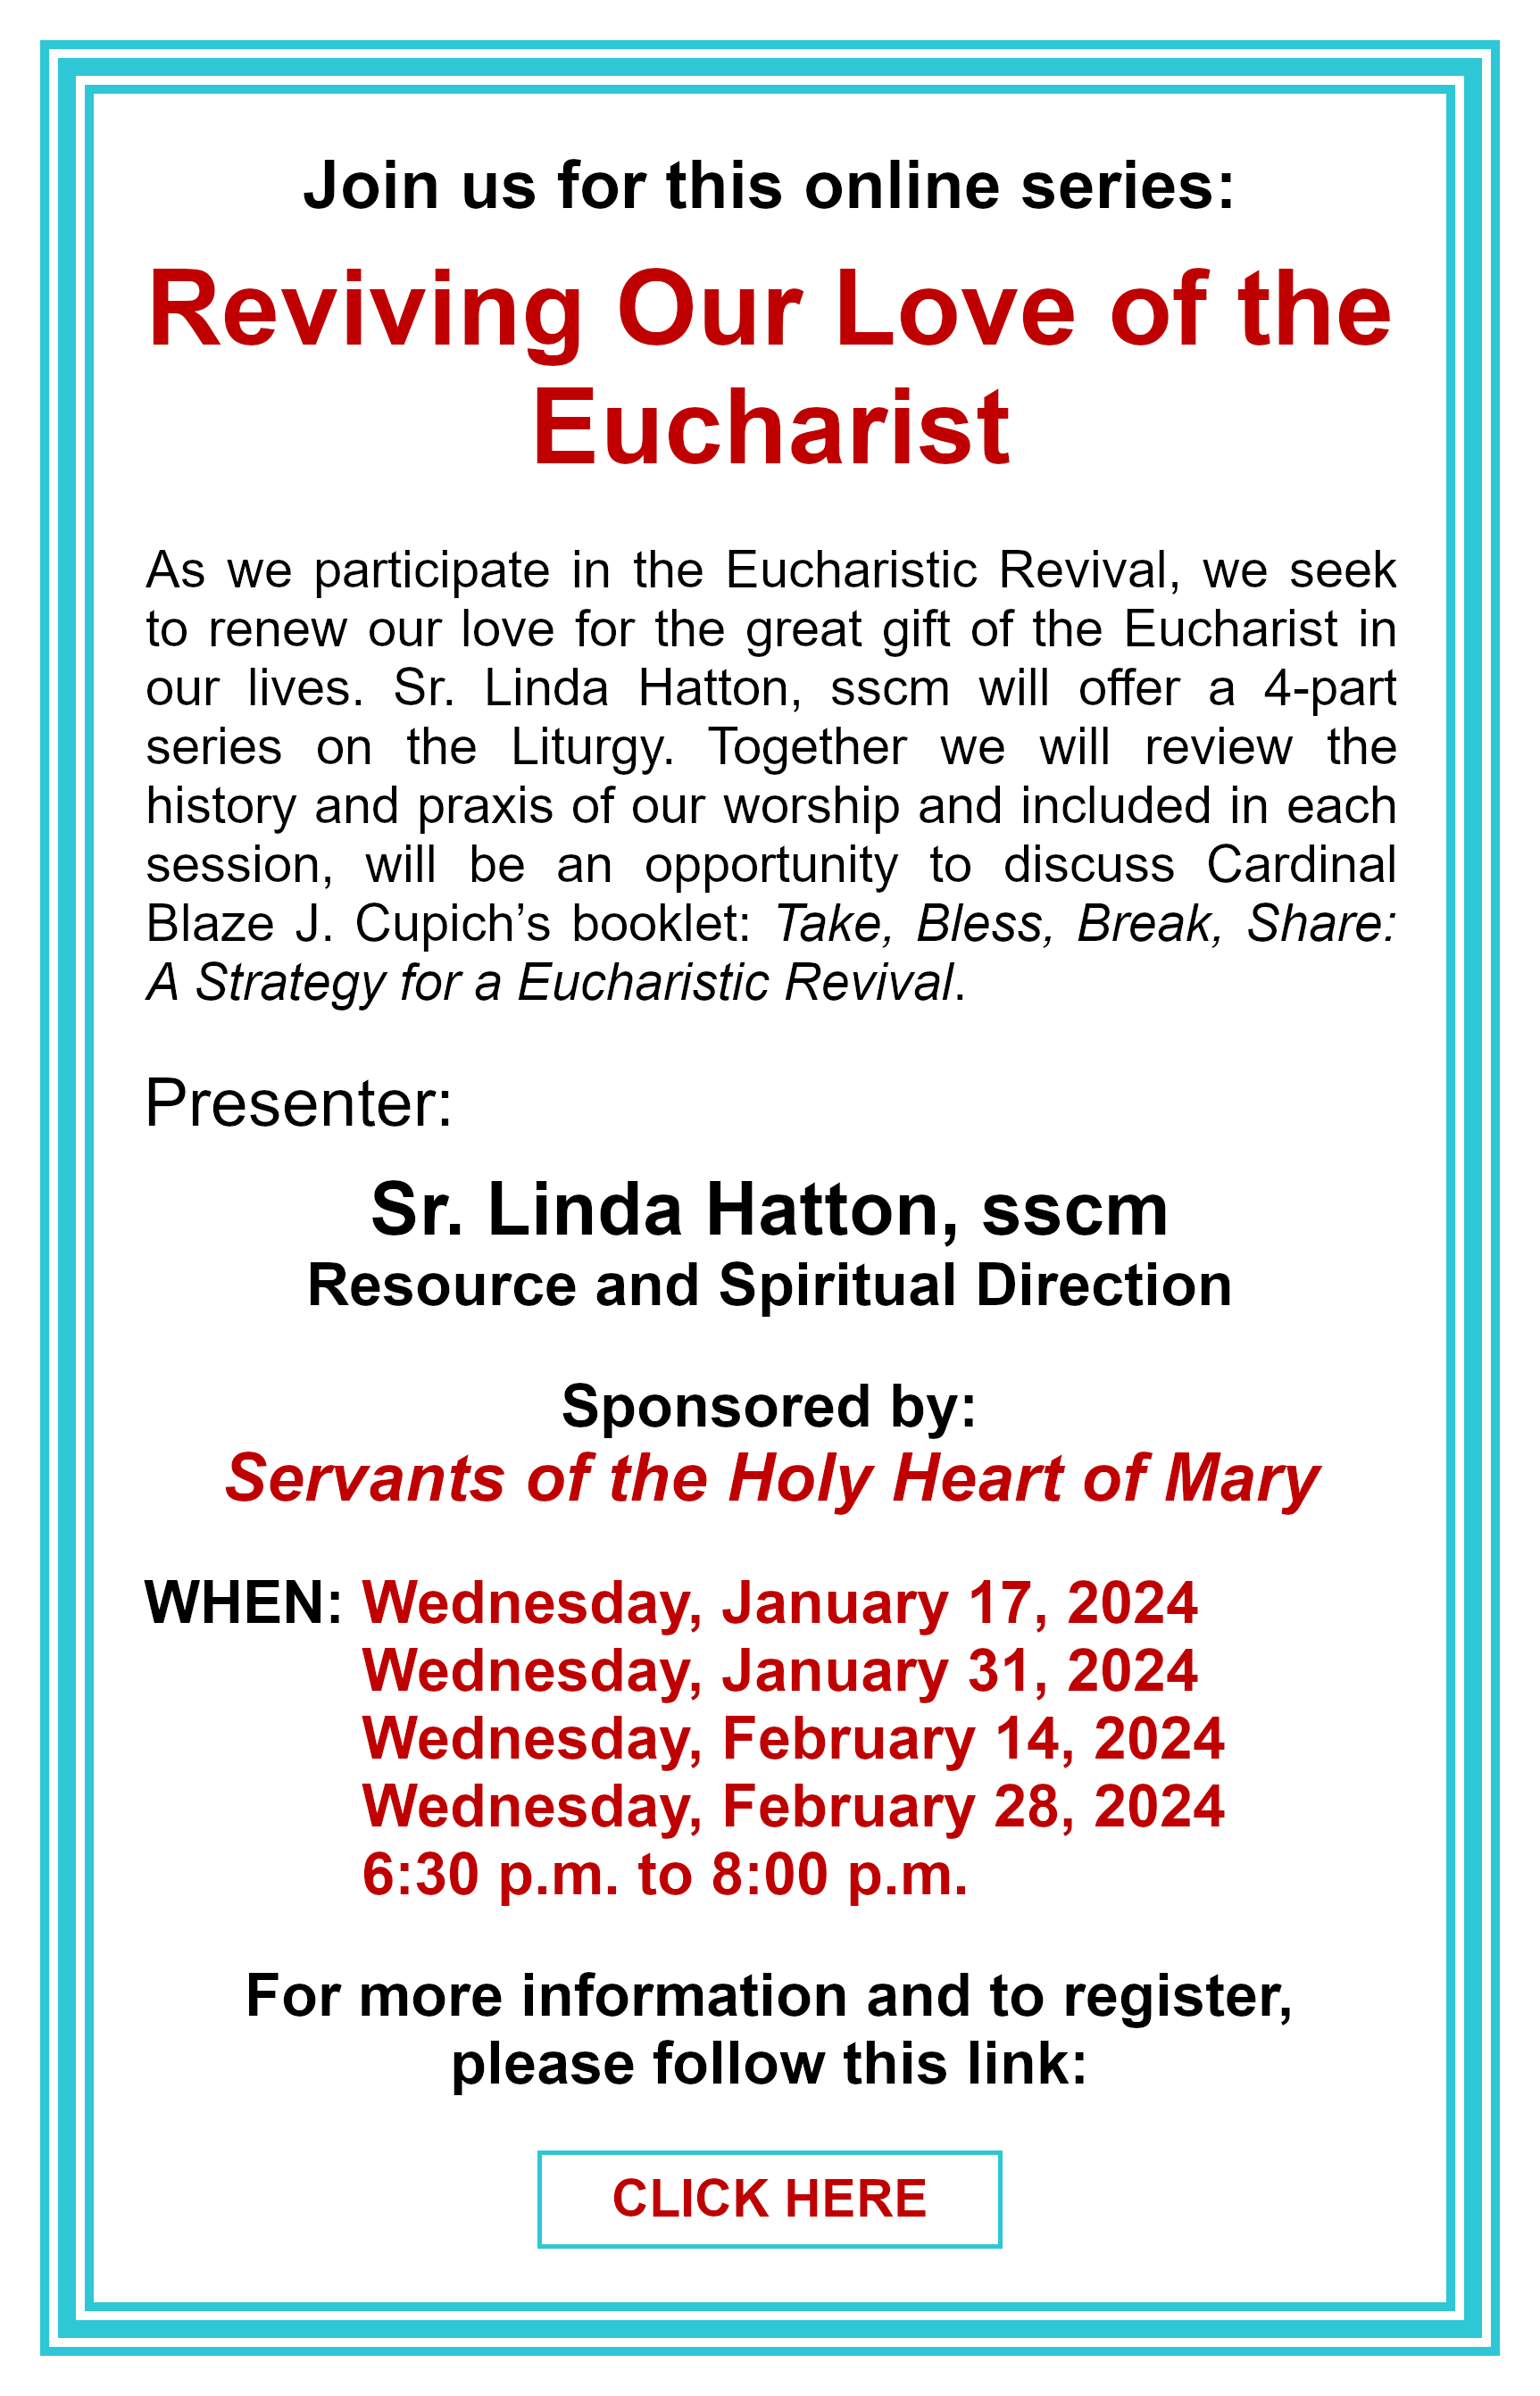 Reviving Our Love of the Eucharist: Click here for more information